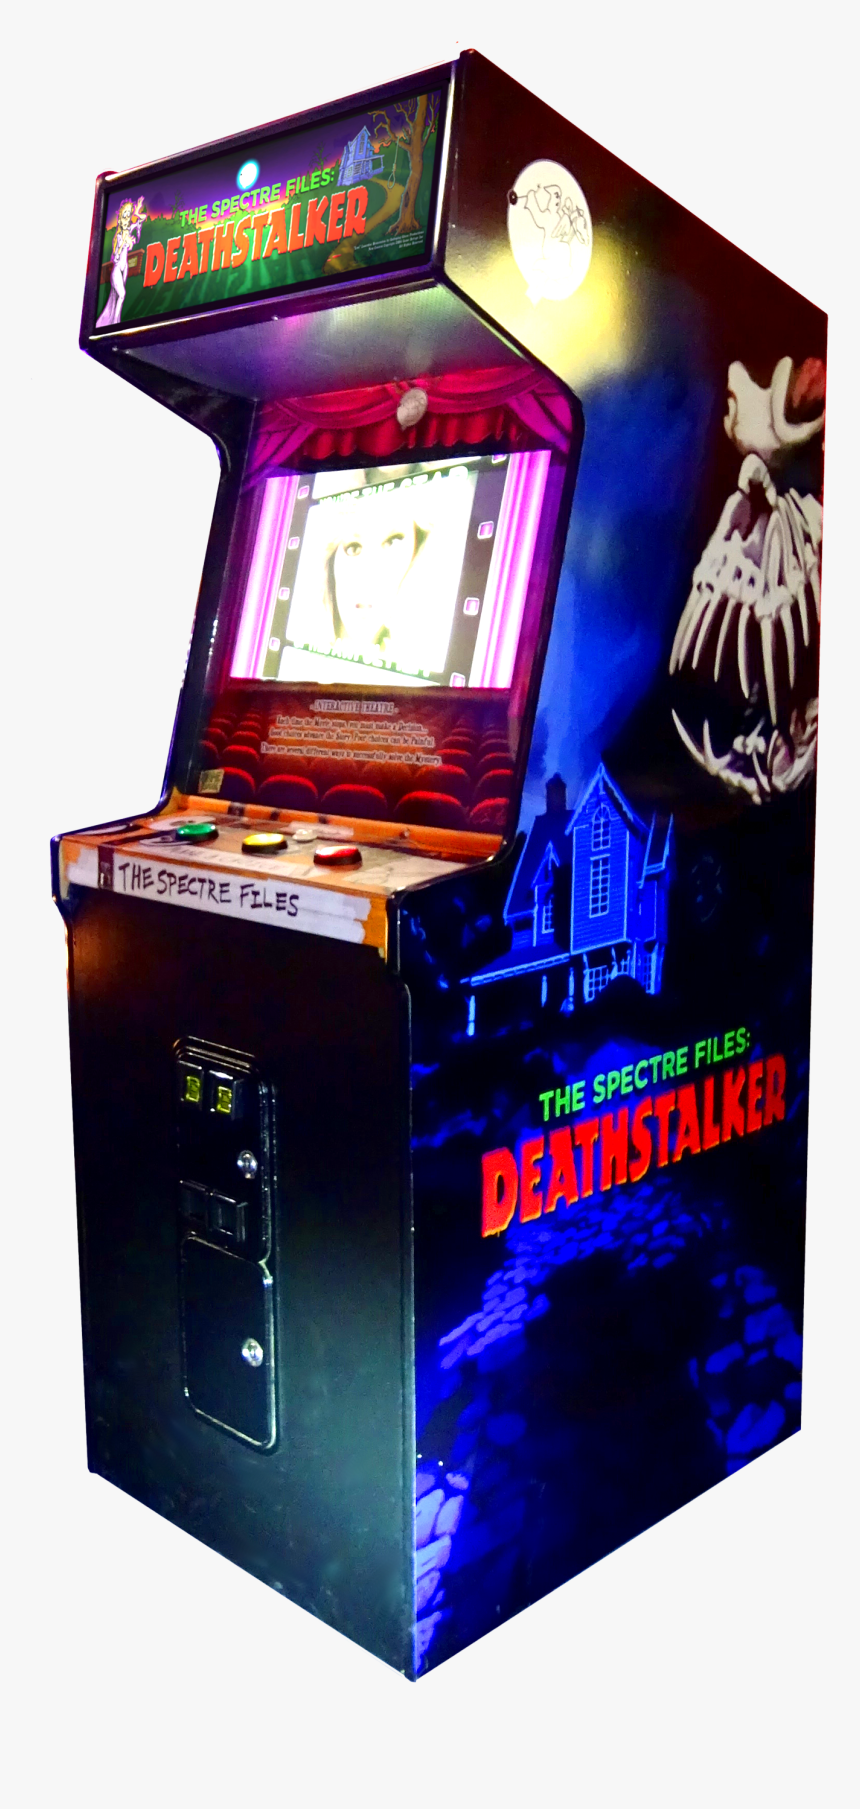 The Spectre Files - New Arcade Cabinets 2019, HD Png Download, Free Download